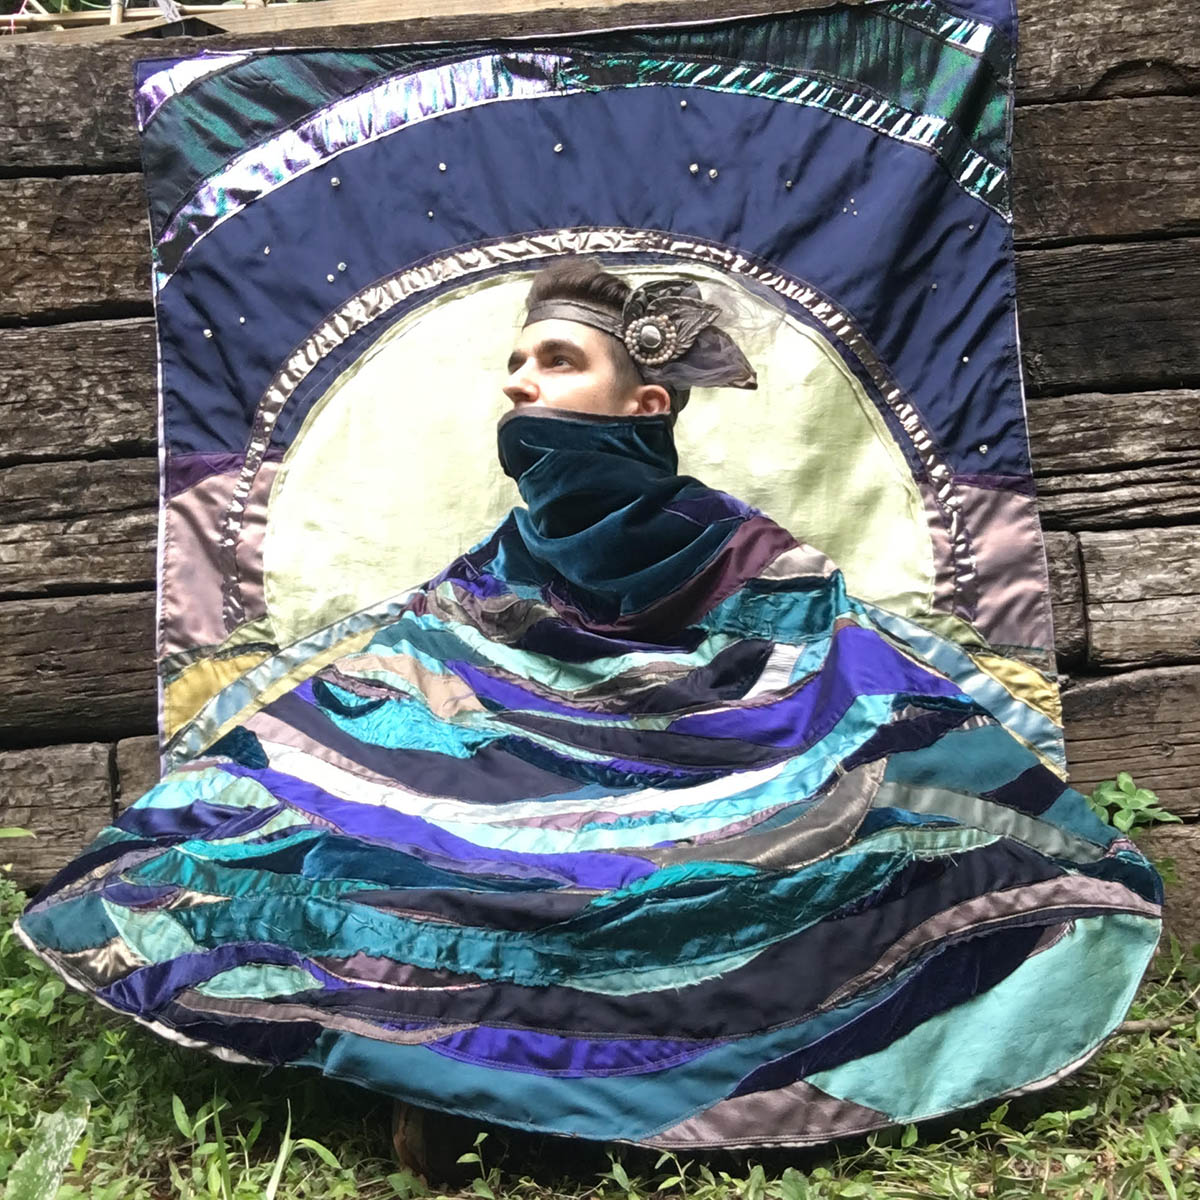 A photo of artist, Eliot eLm Moonstone, posing with their art draped in a multicolored fabric wrap that matches the piece behind them.